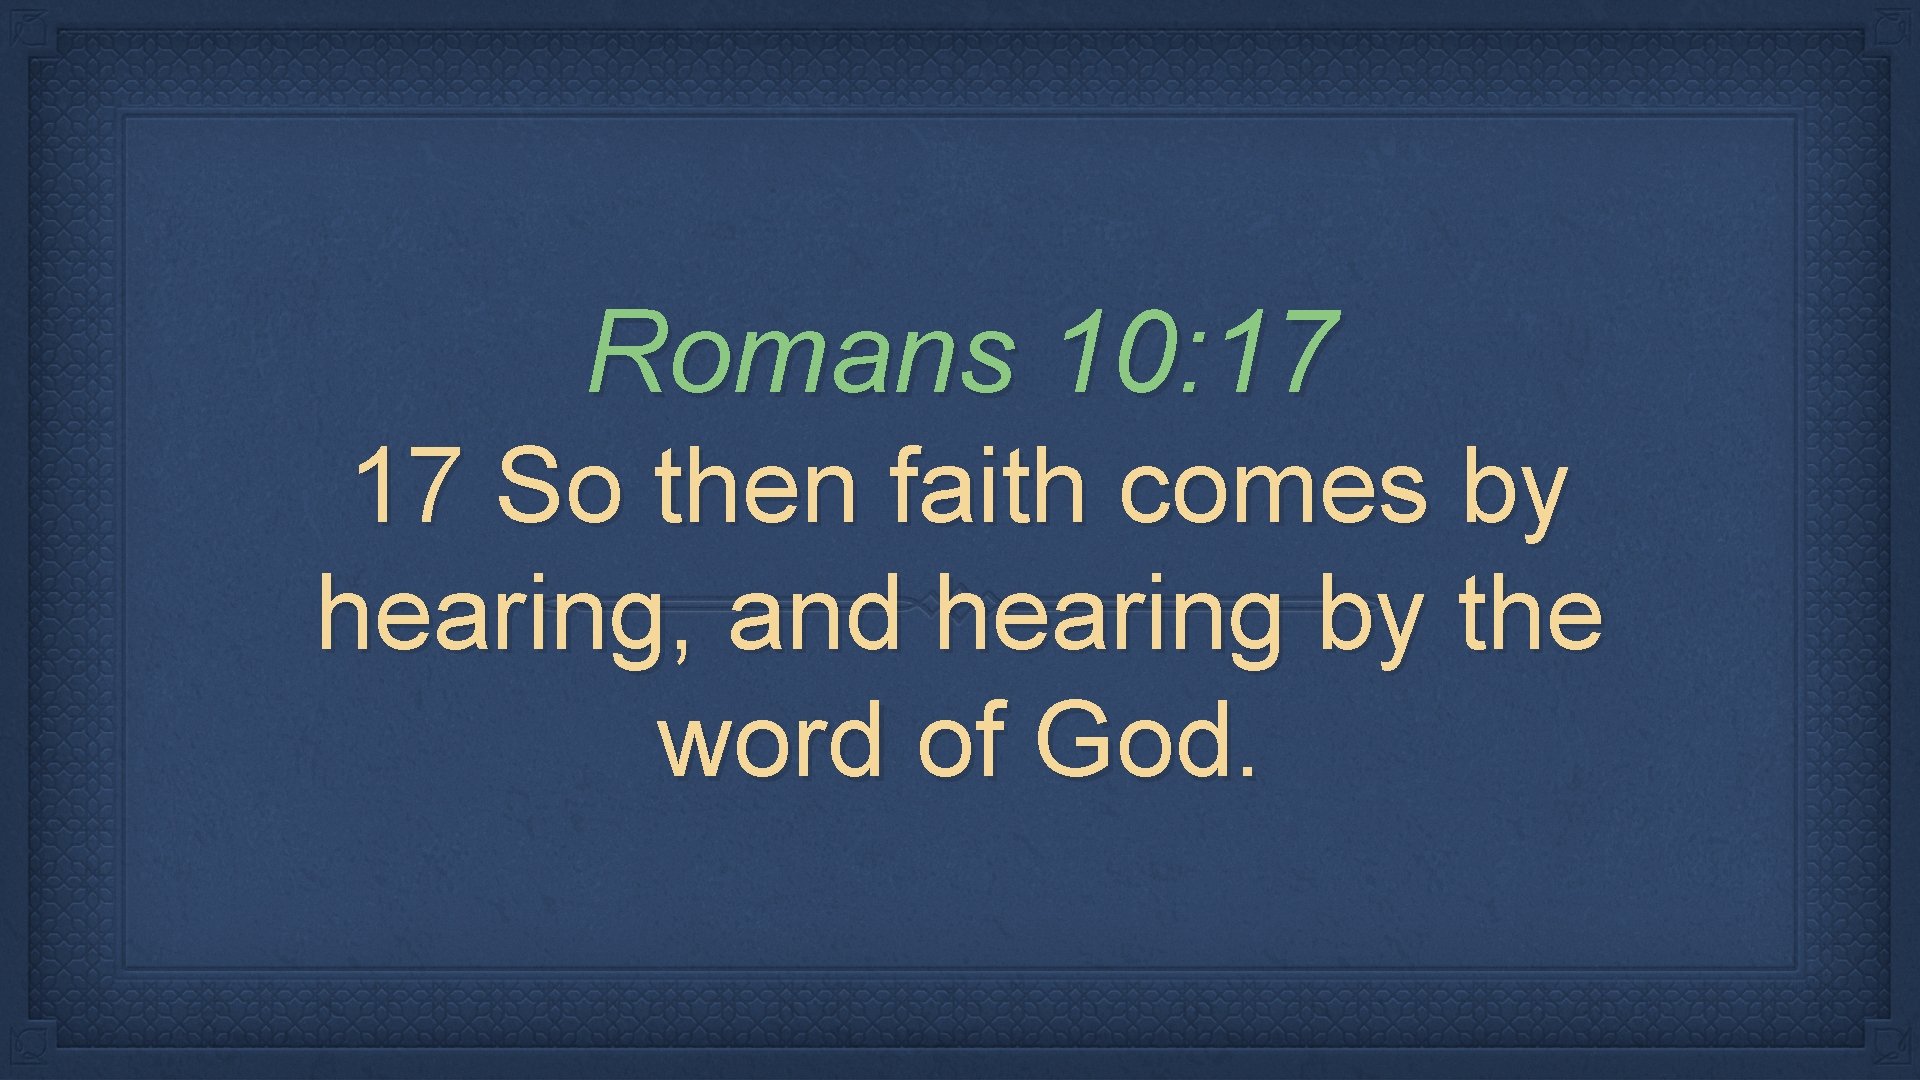 Romans 10: 17 17 So then faith comes by hearing, and hearing by the